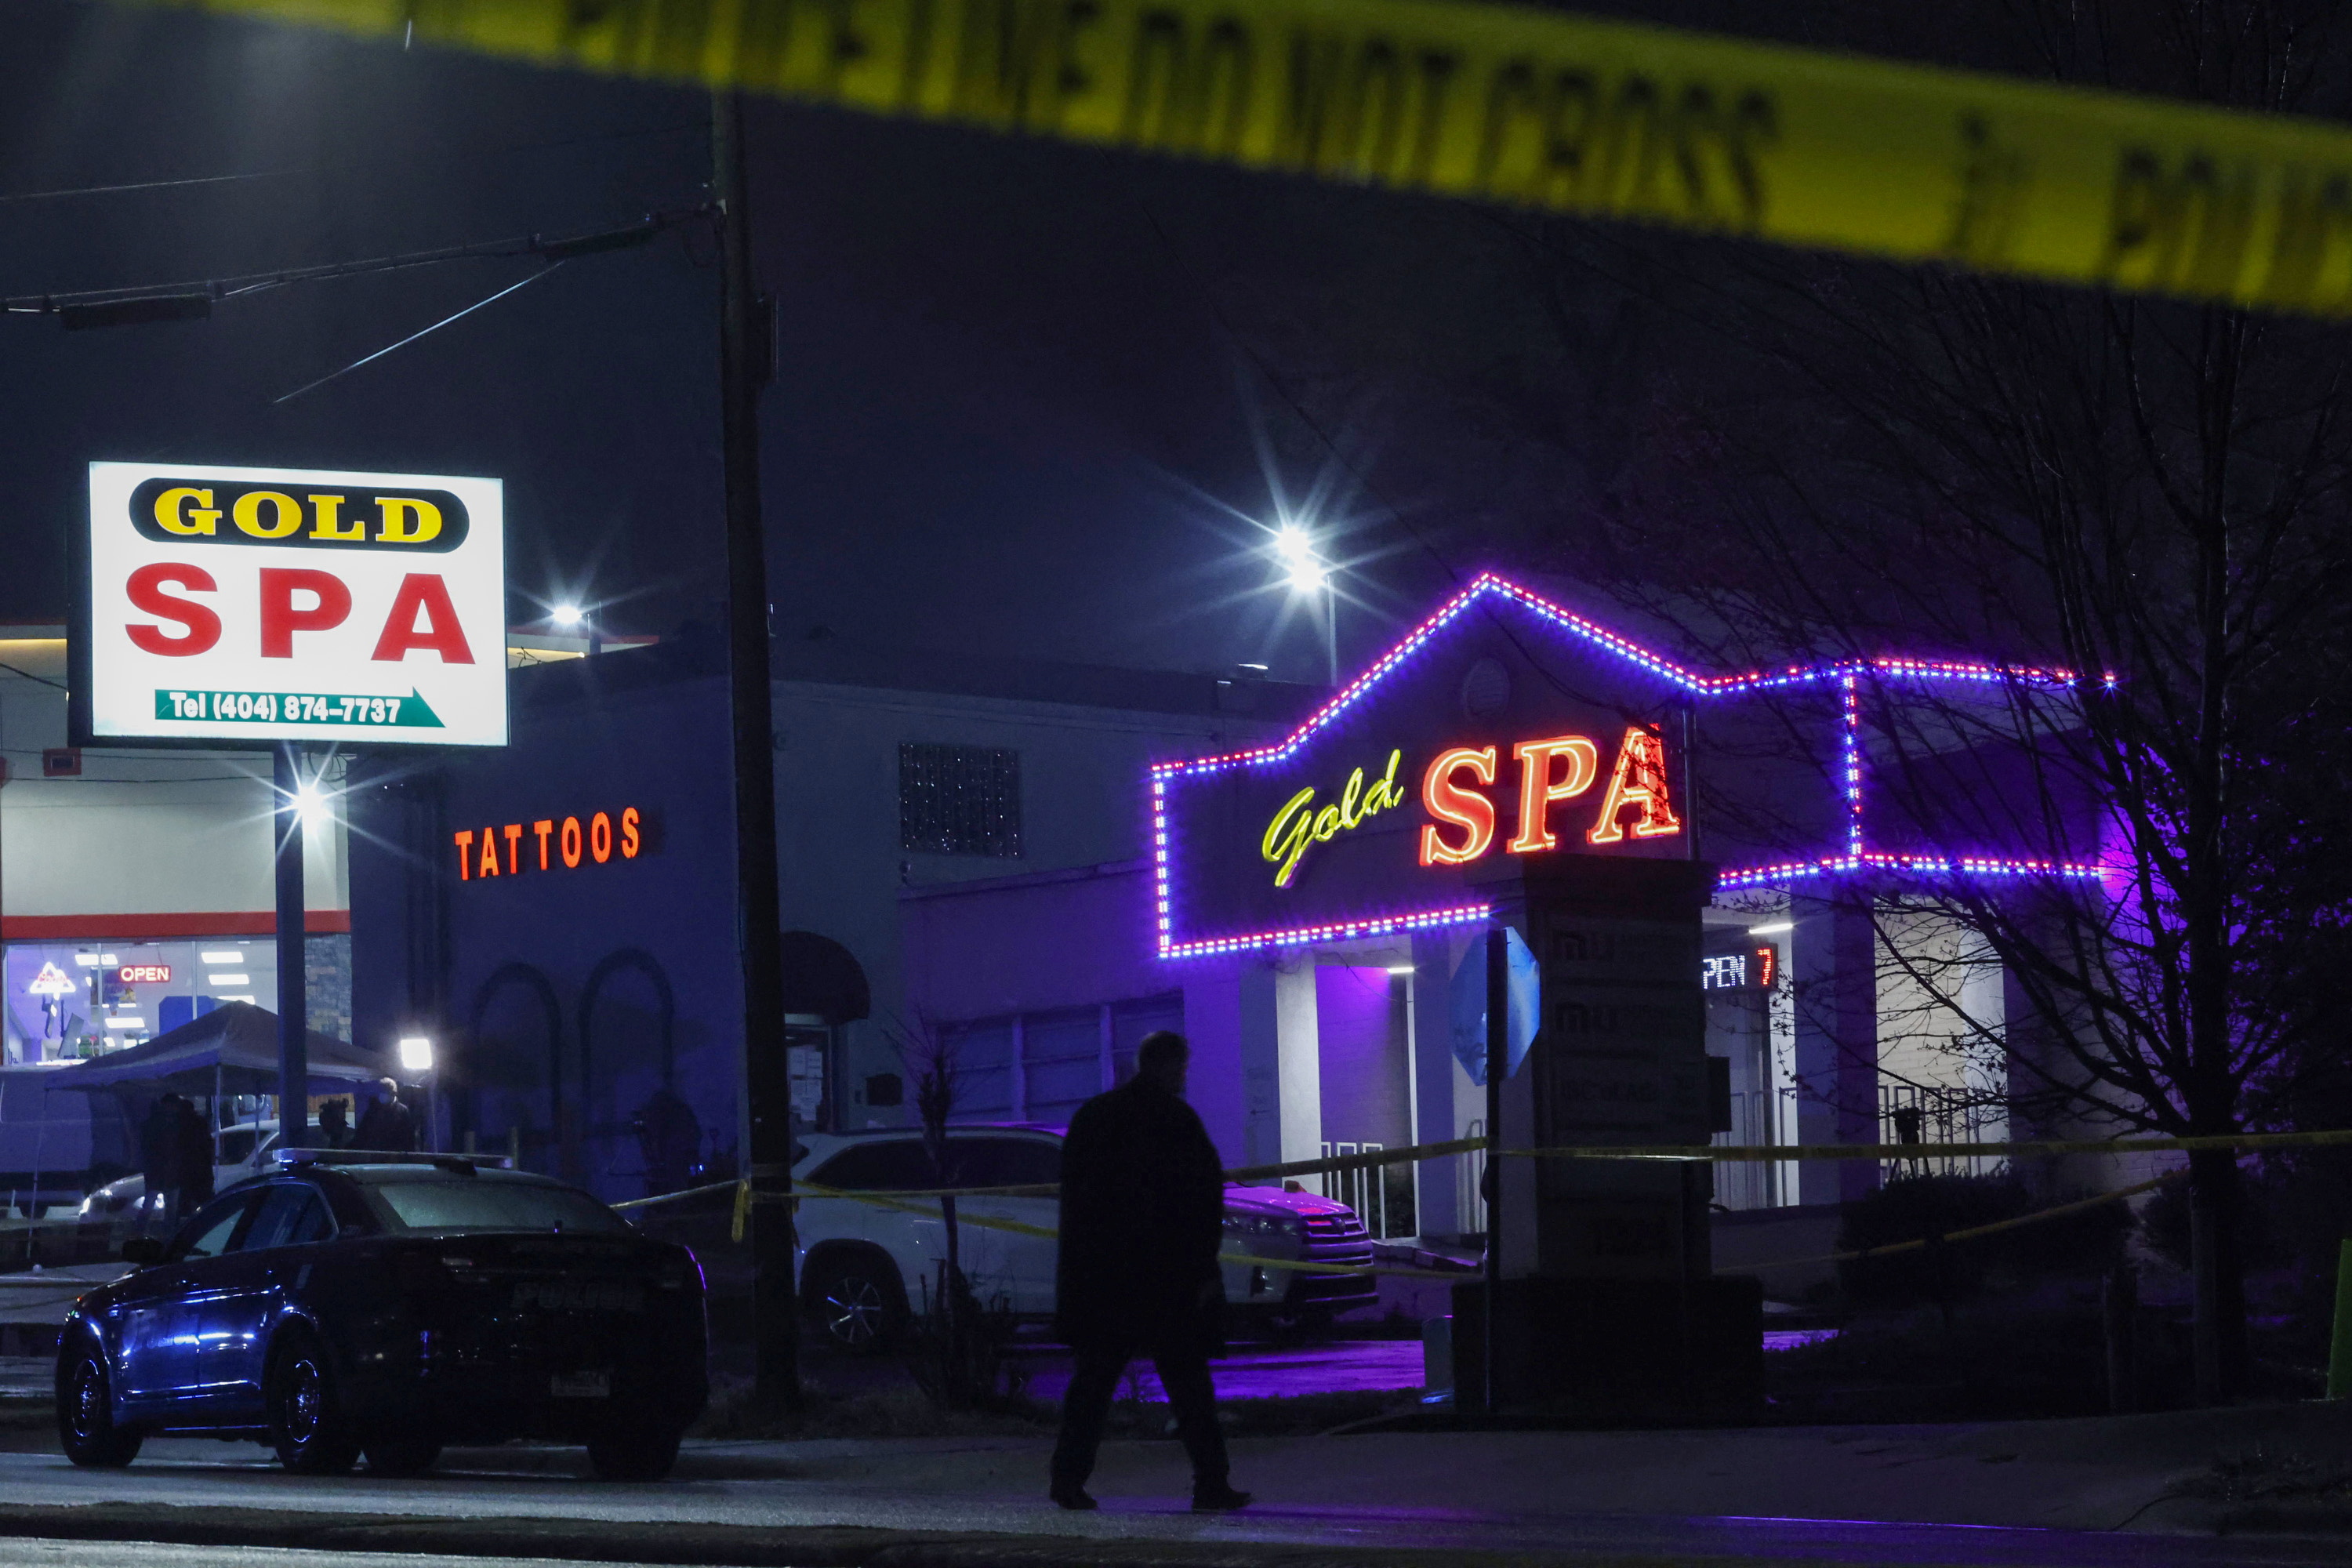 Crime scene tape surrounds Aromatherapy Spa after deadly shootings at three day spas, in Atlanta